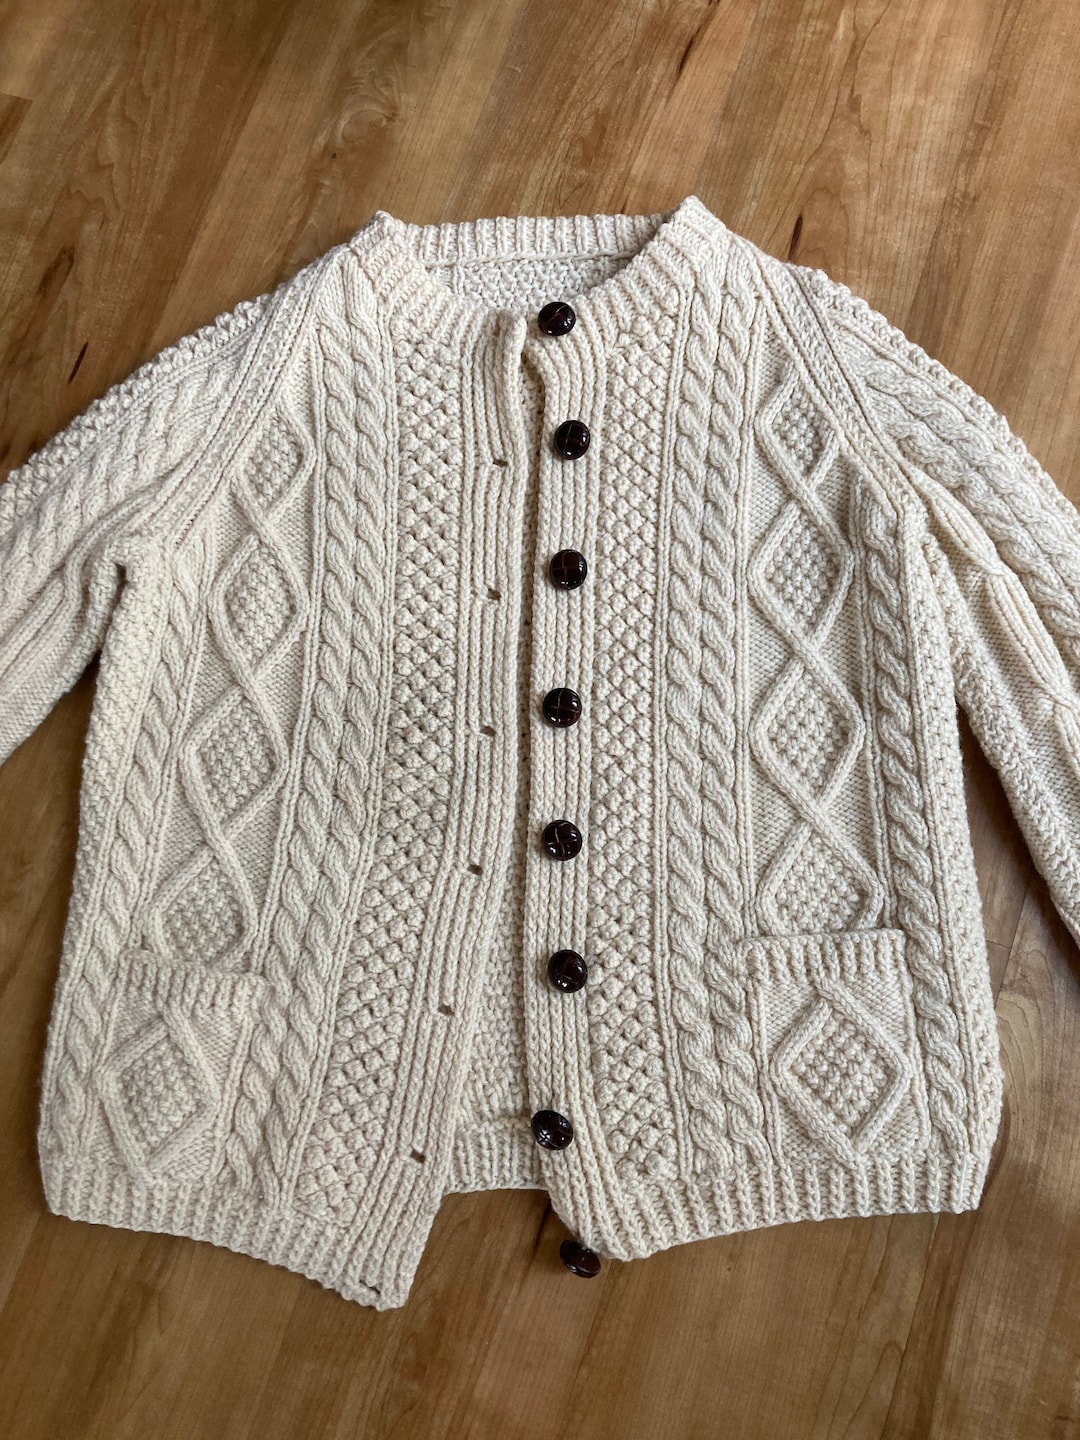 Vintage Hand Knit Wool Sweater - Etsy